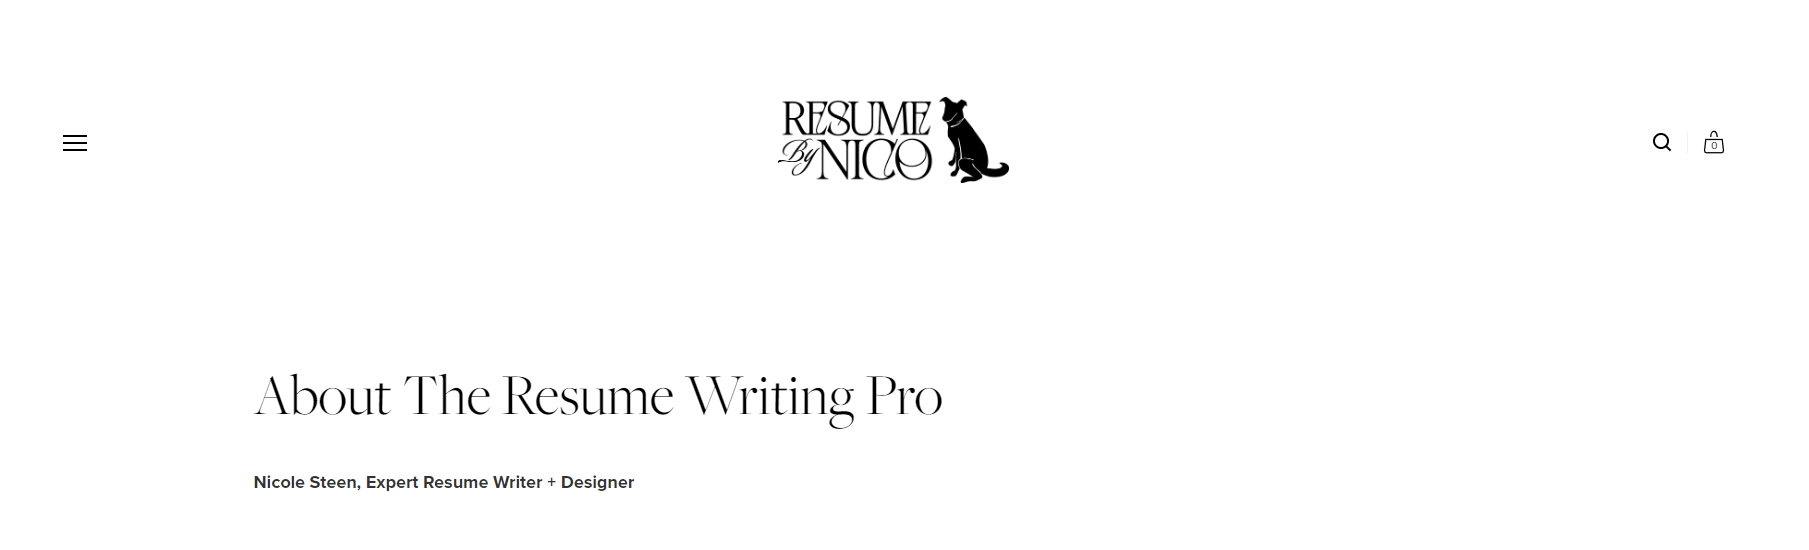 resume writing services in greensboro  resume by nico